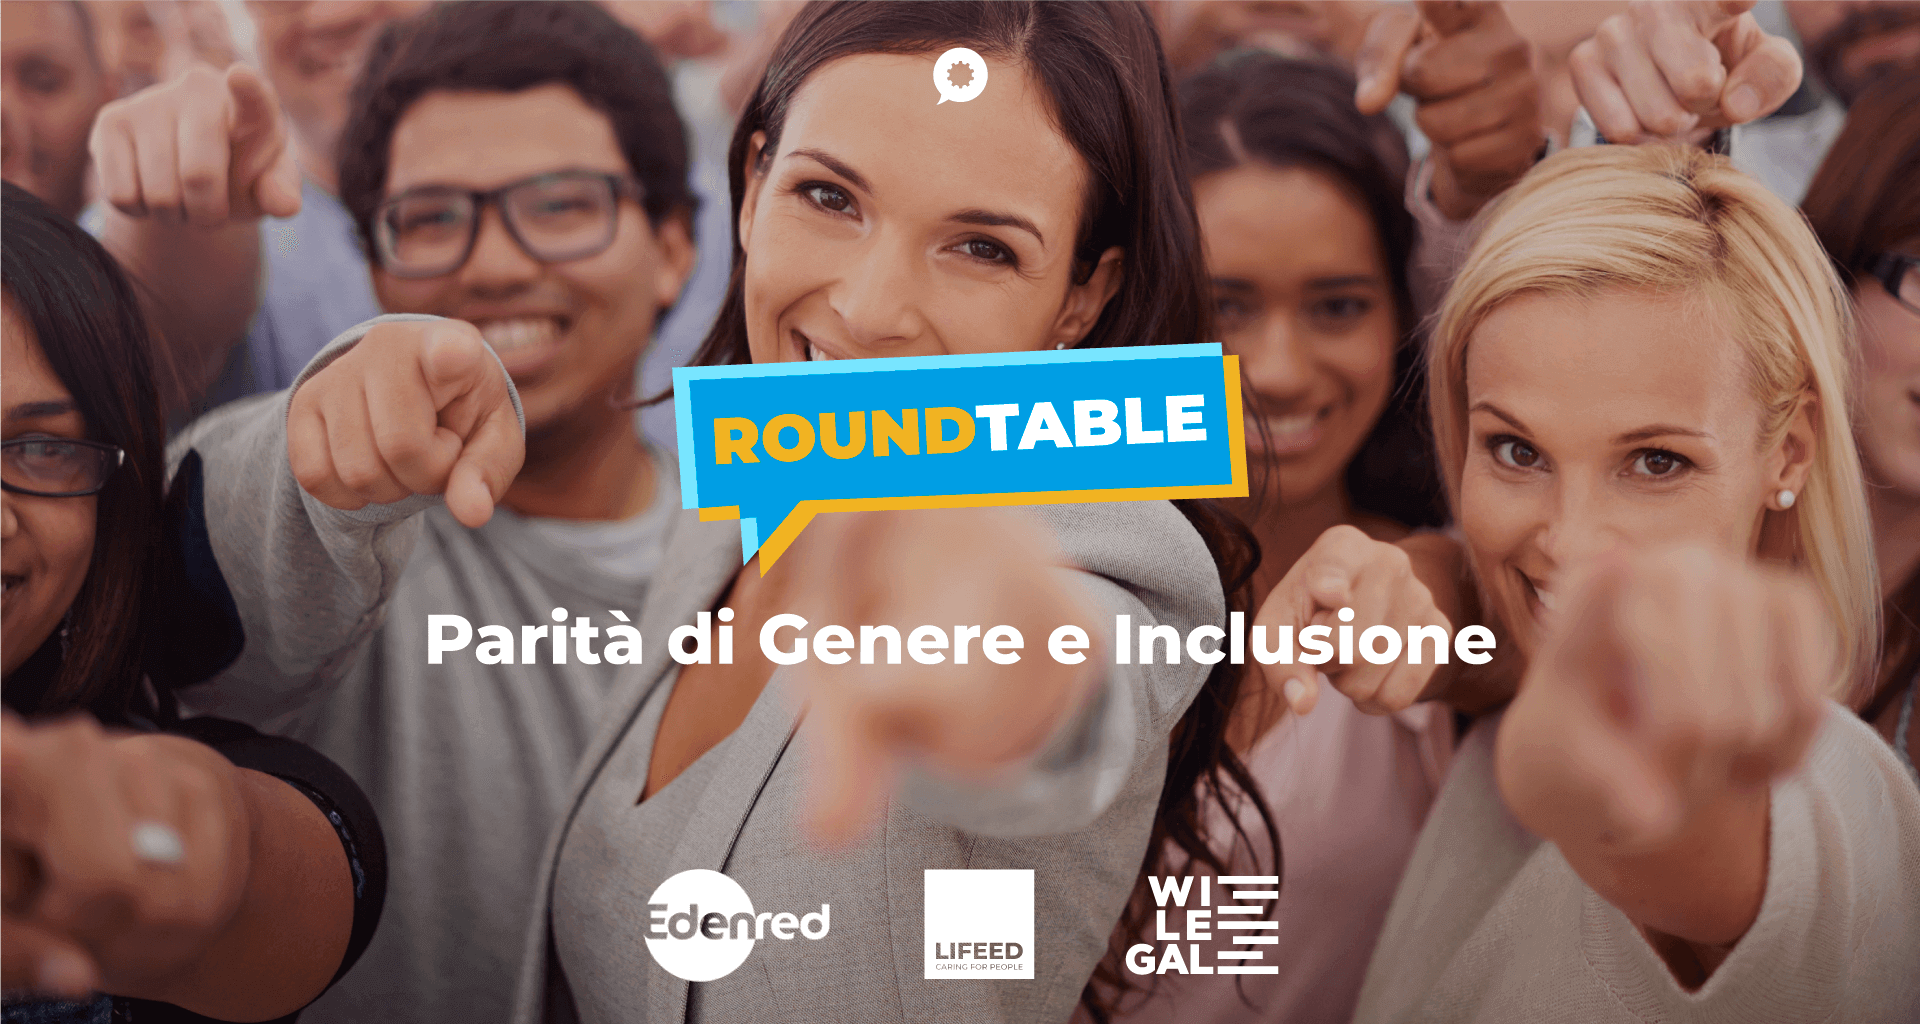 img. 1: "RoundTable con Edenred, Lifeed e WI LEGAL"